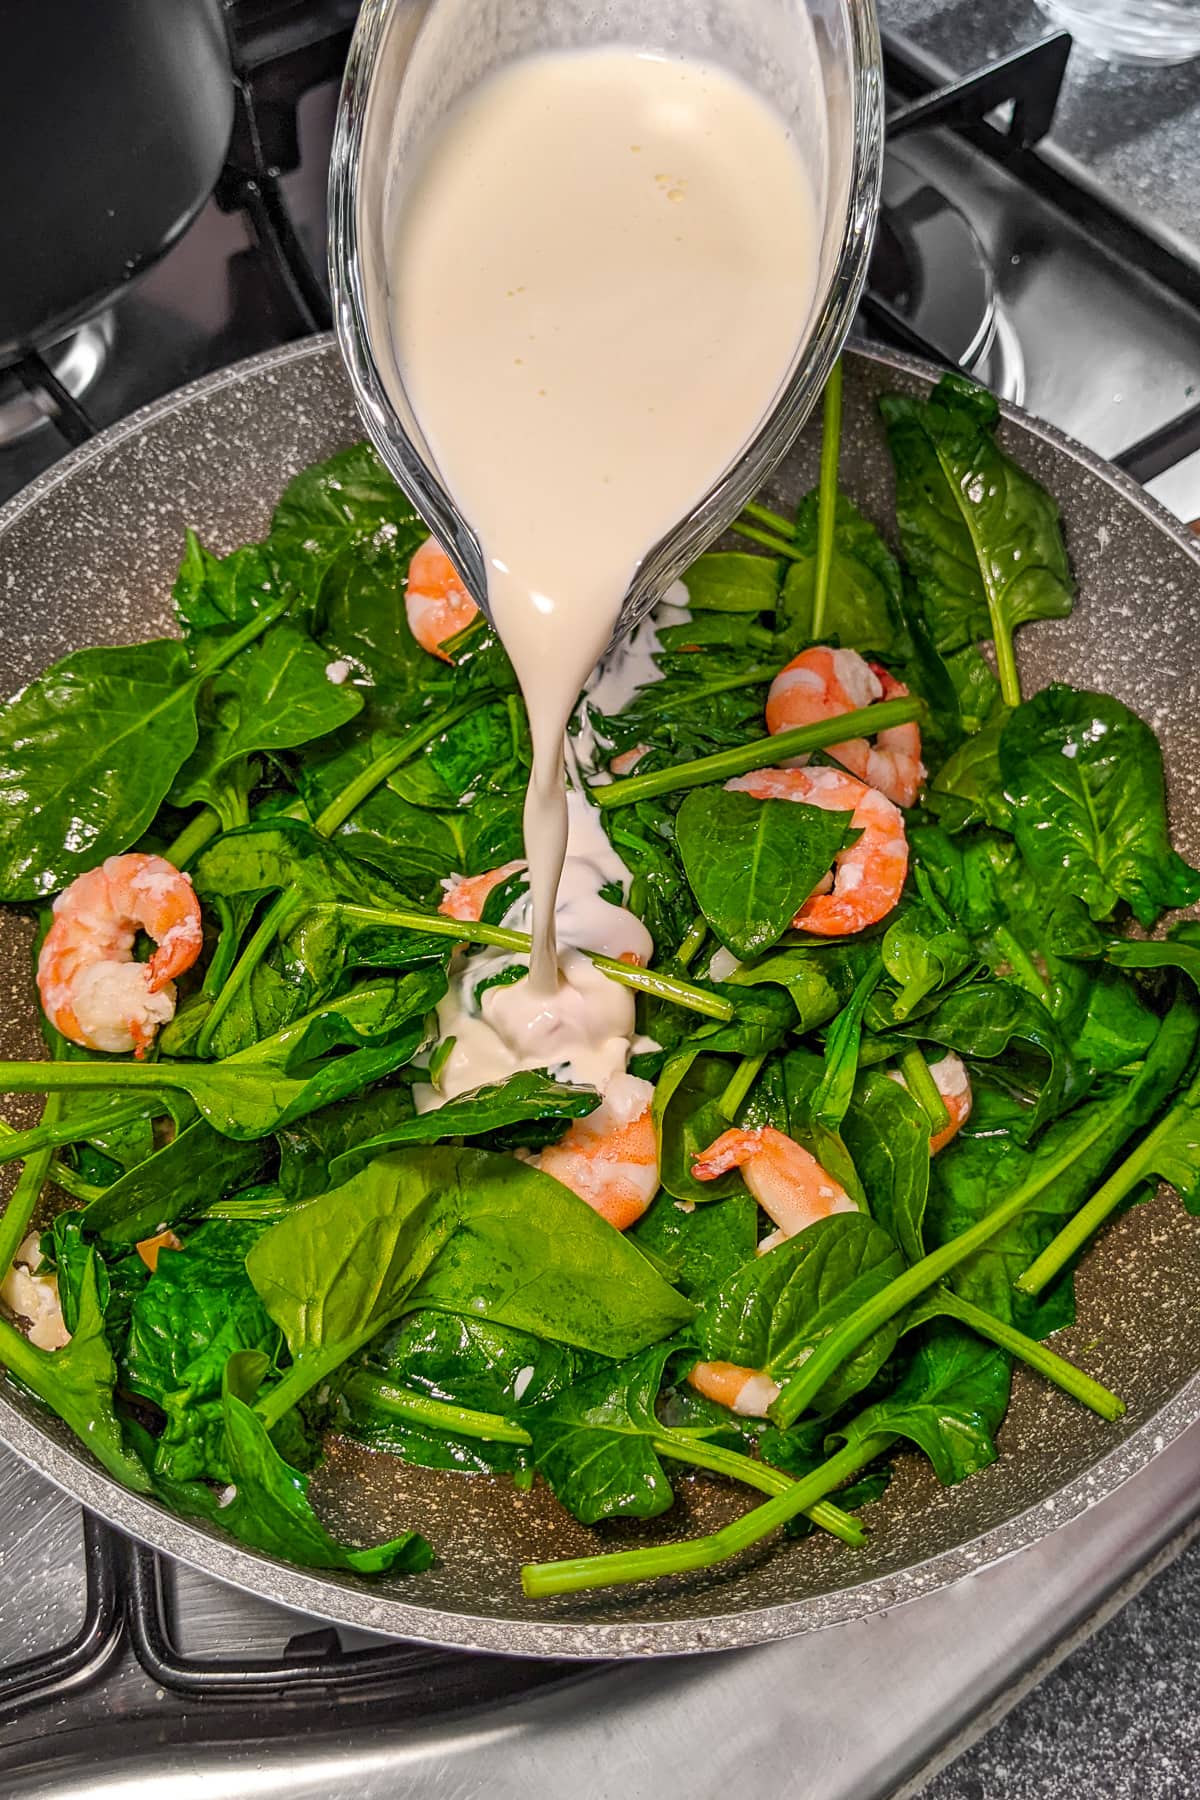 Pouring cream over a mix of fried spinach and prawns.